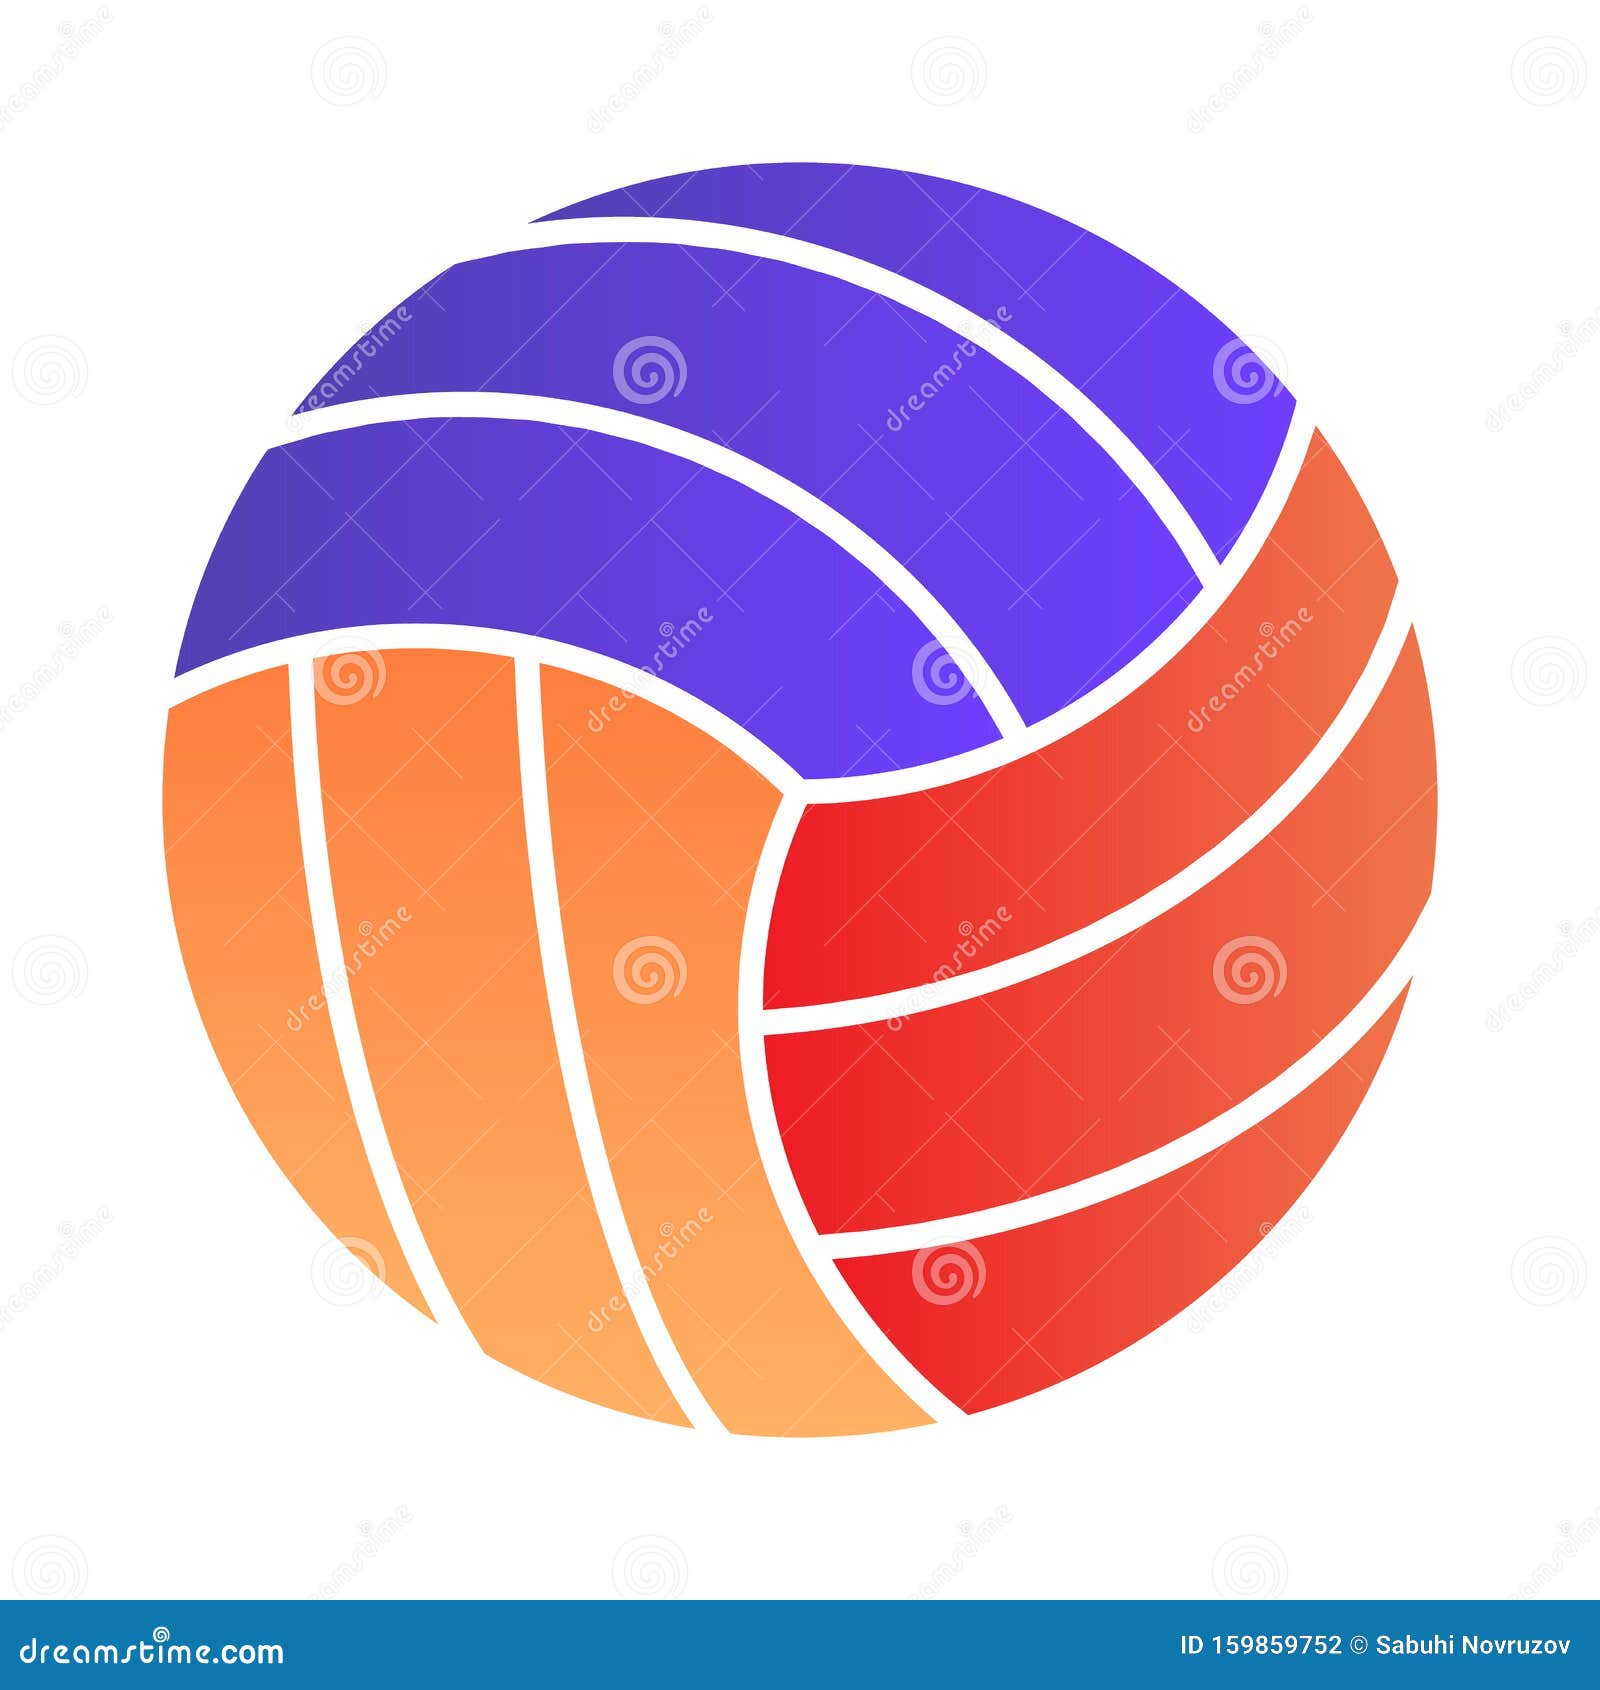 Volleyball Ball Flat Icon. Sports Equipment Color Icons in Trendy Flat ...